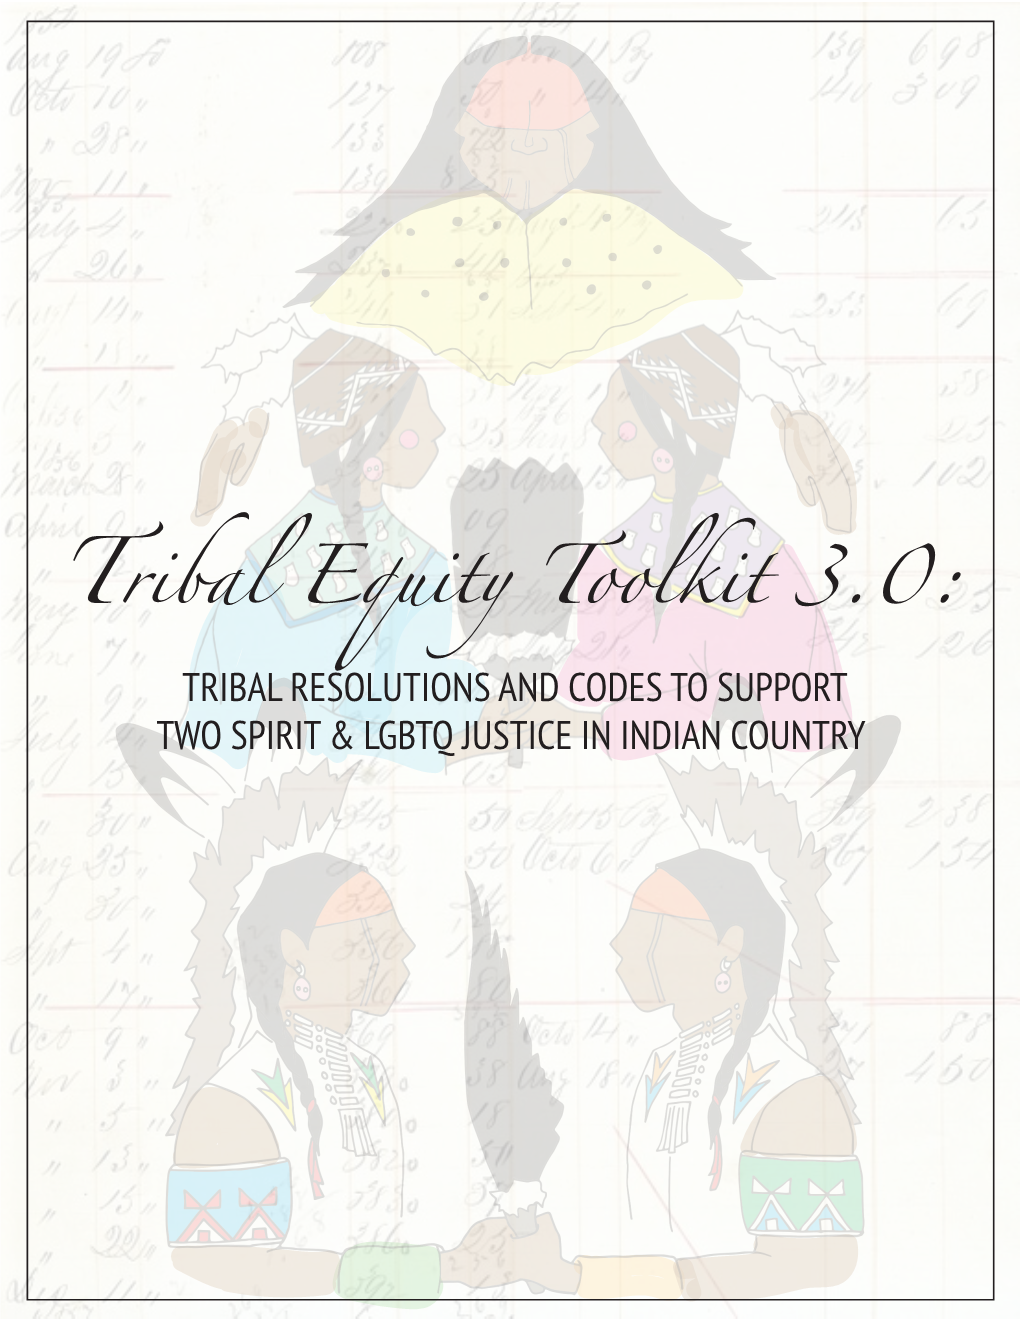 Tribal Equity Toolkit 3.0